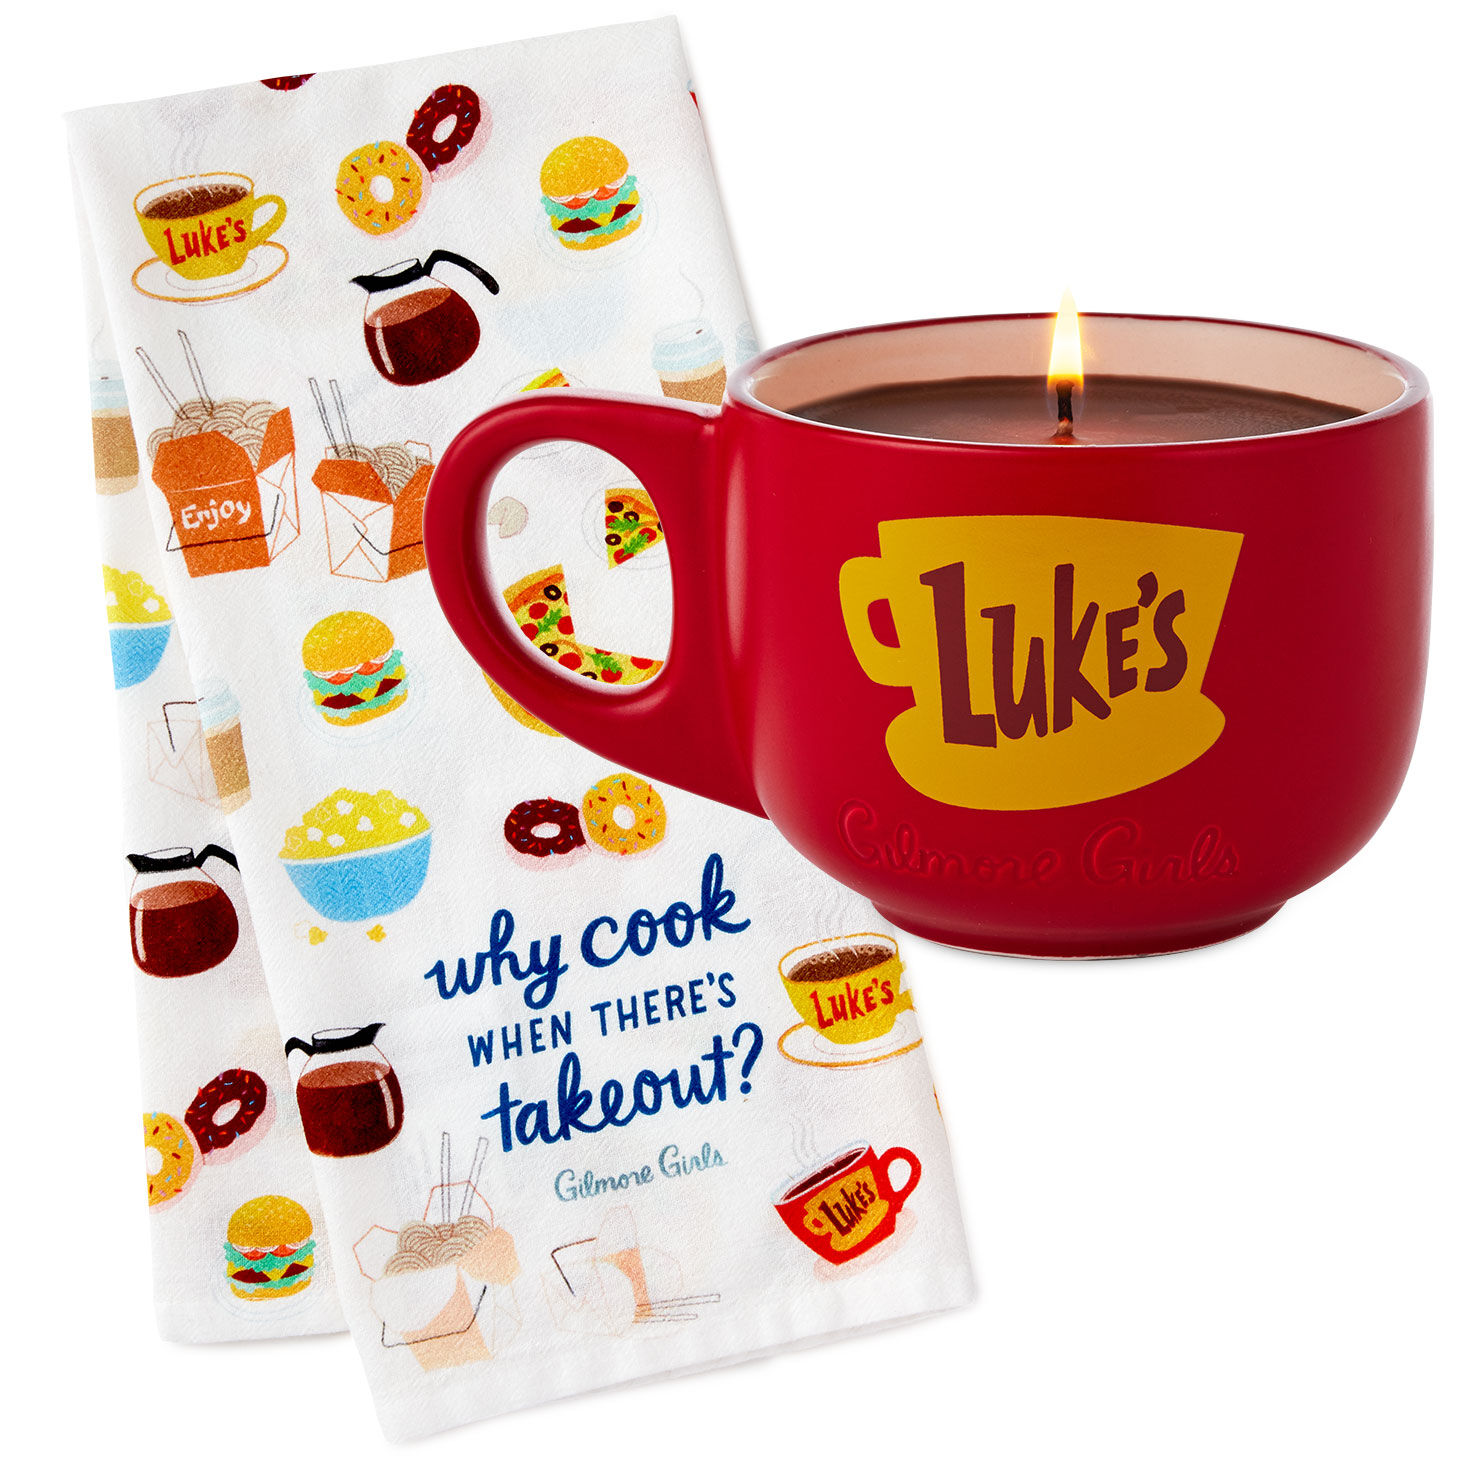 Gilmore Girls Coffee and Takeout Gift Set for only USD 14.99-29.99 | Hallmark